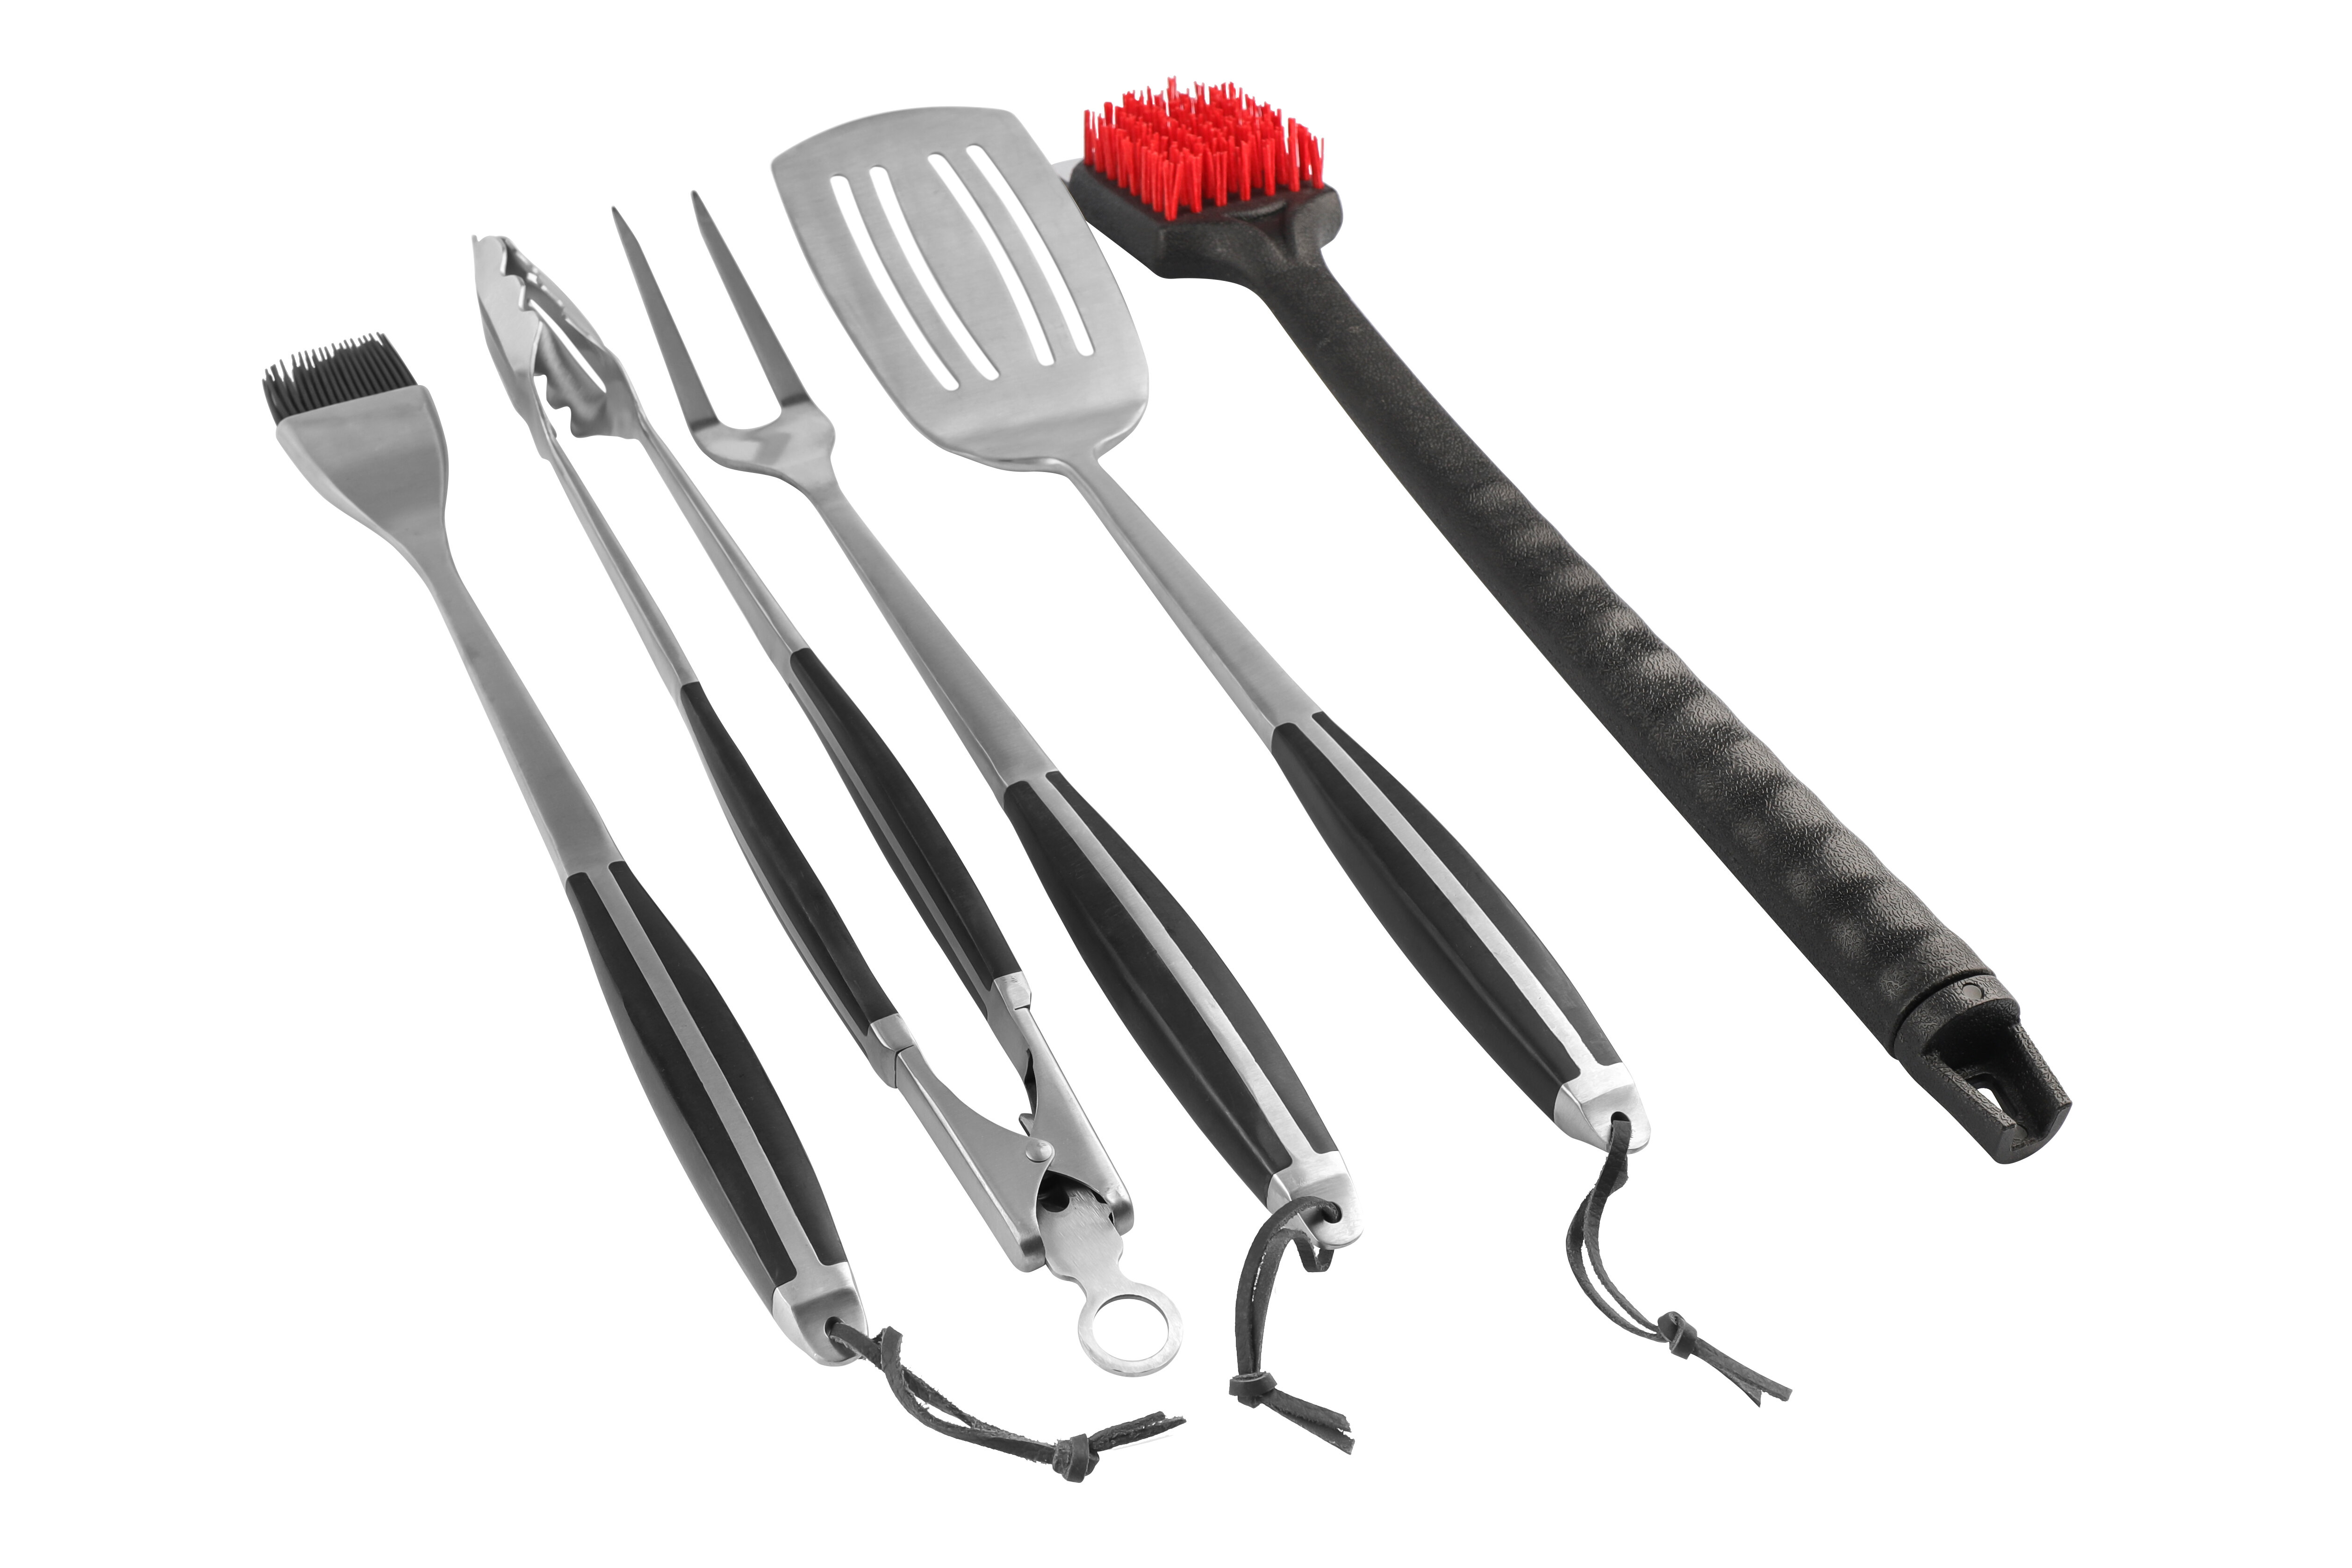  BBQ-AID 3 Piece Grill Set BBQ Accessories - Kitchen Tongs,  Metal Spatula & Fork Utensils - Heavy Duty Stainless Steel Barbecue Grill  Utensils for Outdoor Grill with Solid Sturdy Wood